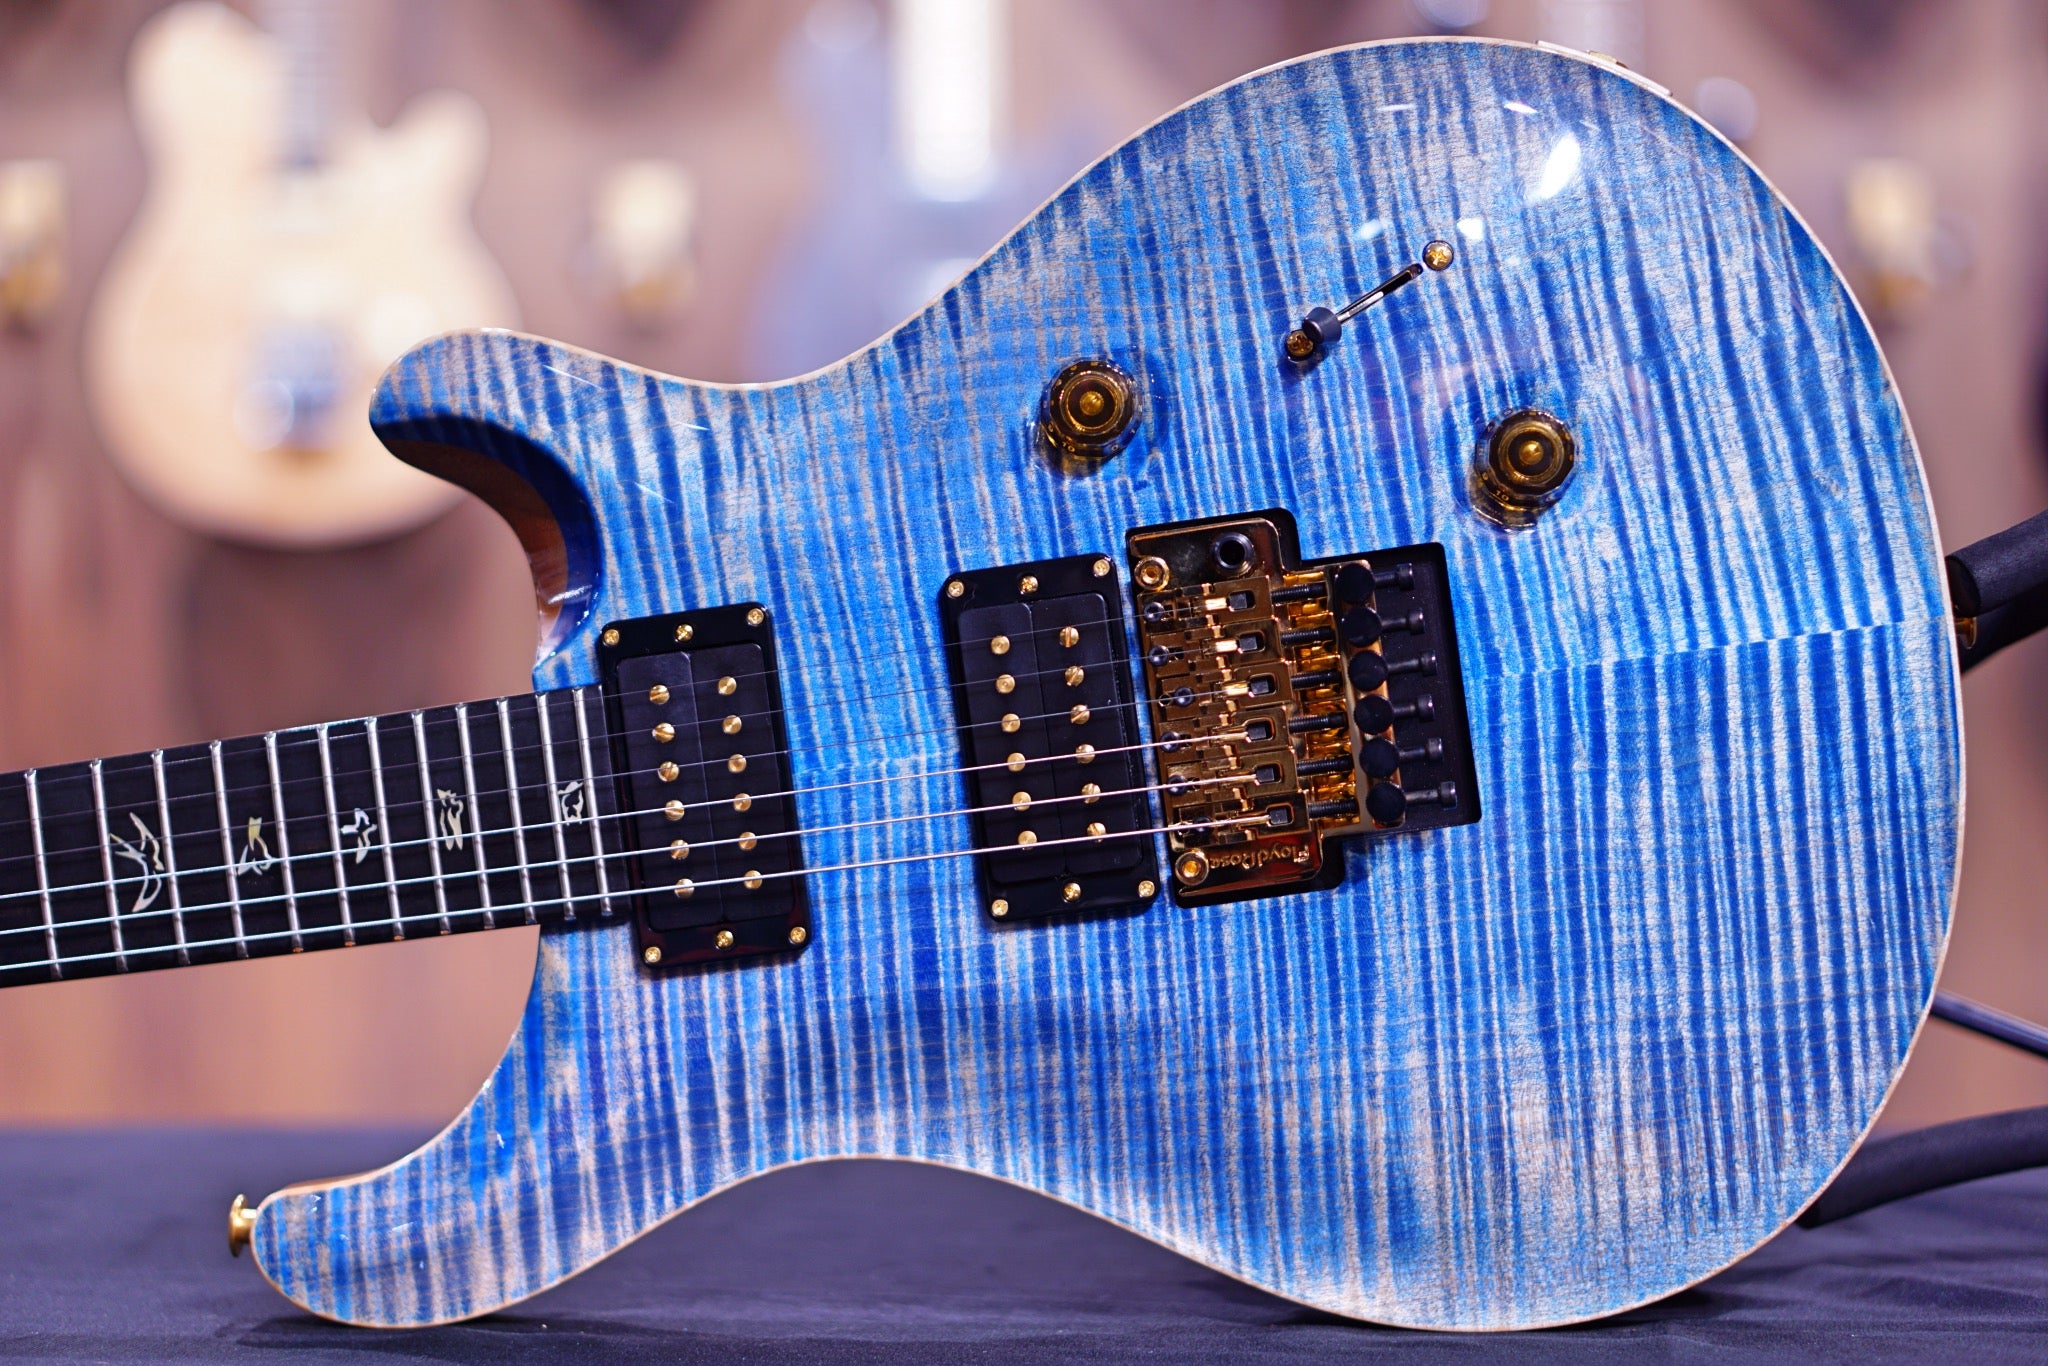 PRS Custom 24 Floyd wood library faded blue jeans stained flame neck run 0336245 - HIENDGUITAR   PRS GUITAR